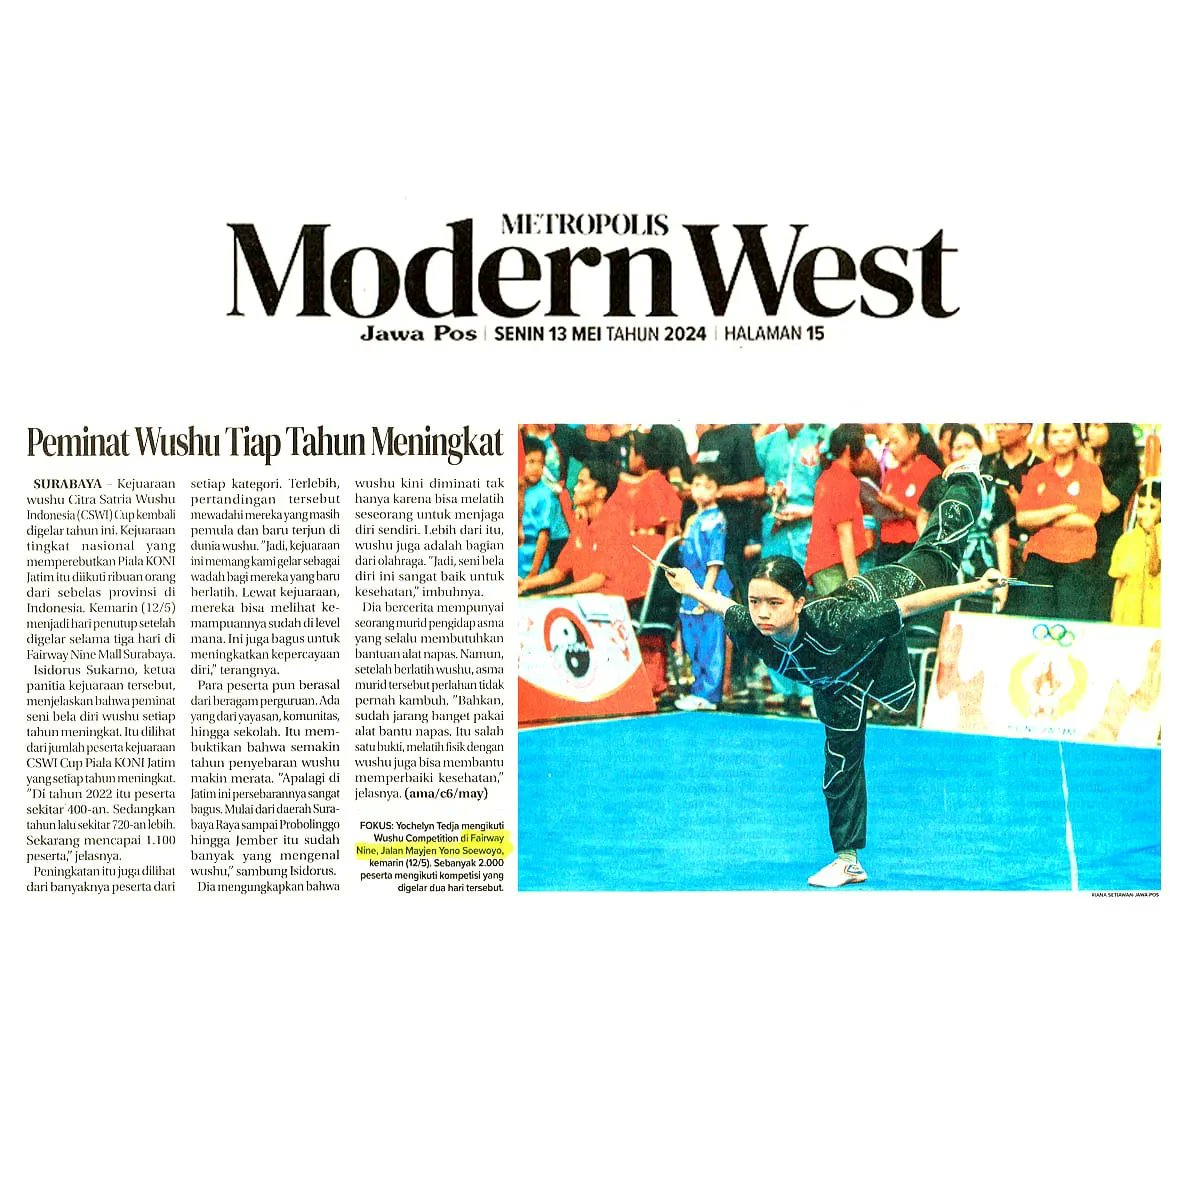 .
And Hey Look 😄📰
We Are On The News!
#MediaOnFairwayNine
---
*PEMINAT WUSHU*
*TIAP TAHUN MENINGKAT*
---
JAWA POS
Monday, 13 Mei 2024
Page 15
---
Thank You
For The Coverage! 👍
---
#CSWIcup2024
#Wushu
#Sports
#Indonesia
#Competition
#KONI
#news #national 
#bestoftheday